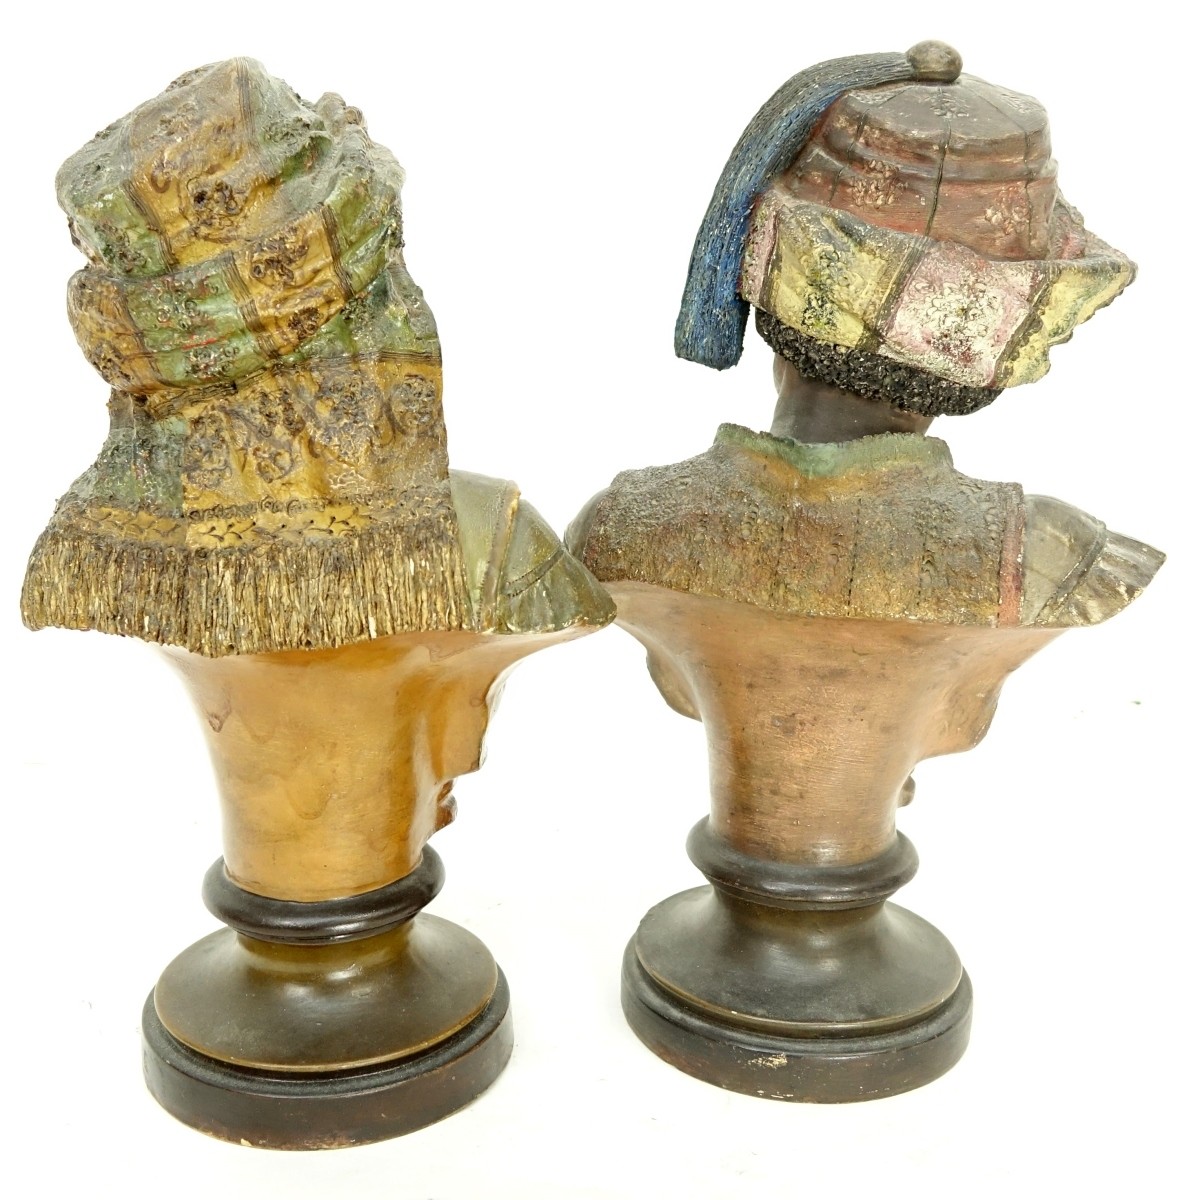 Pair of Polychrome Pottery Nubian Figures